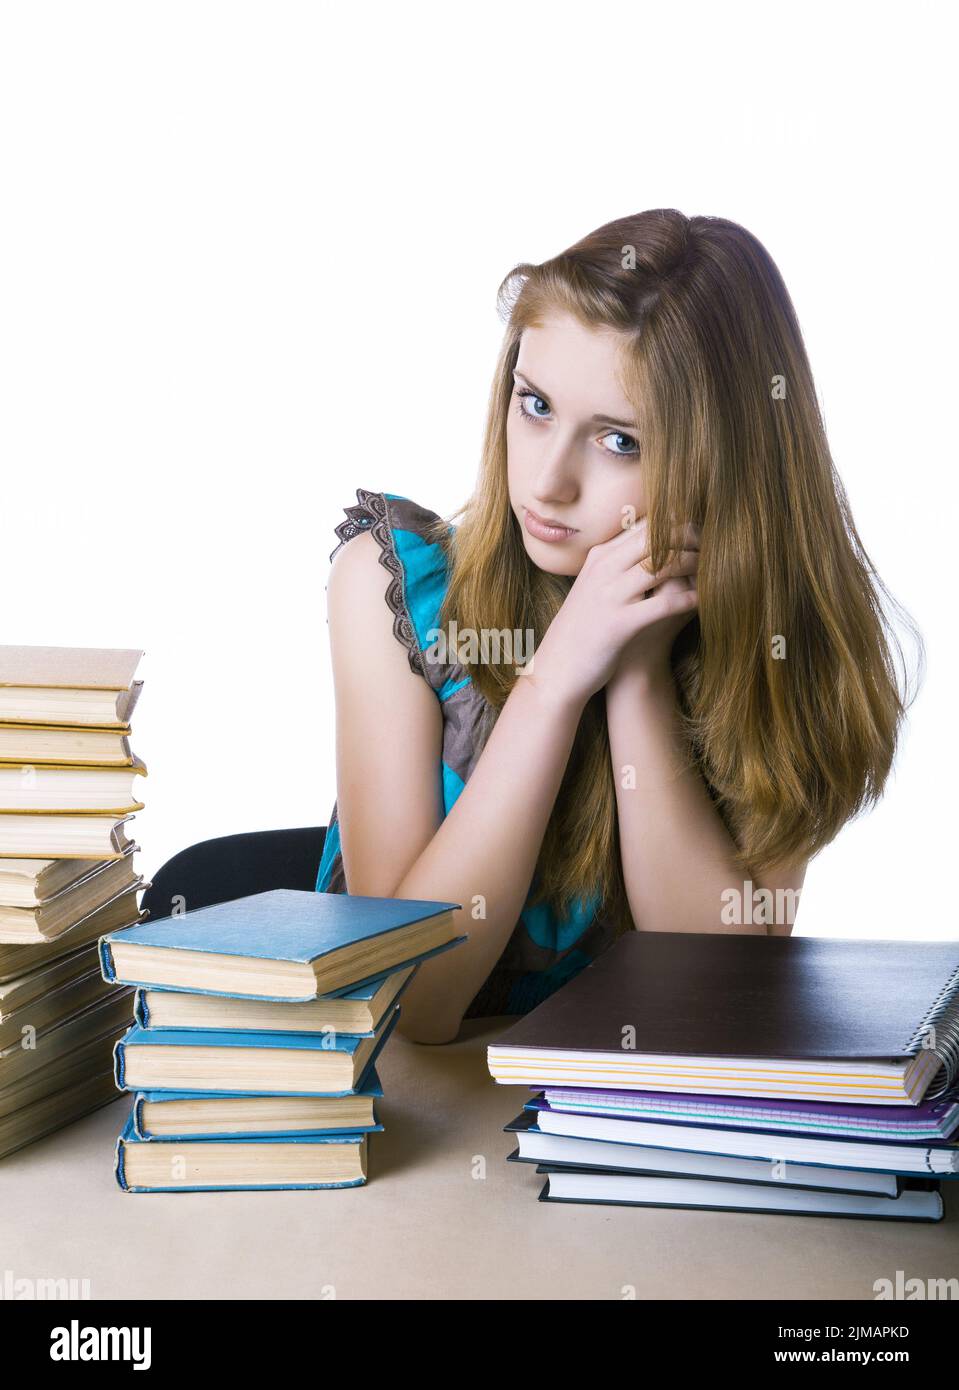 The girl with pile of books and writing-books on a white background Stock Photo